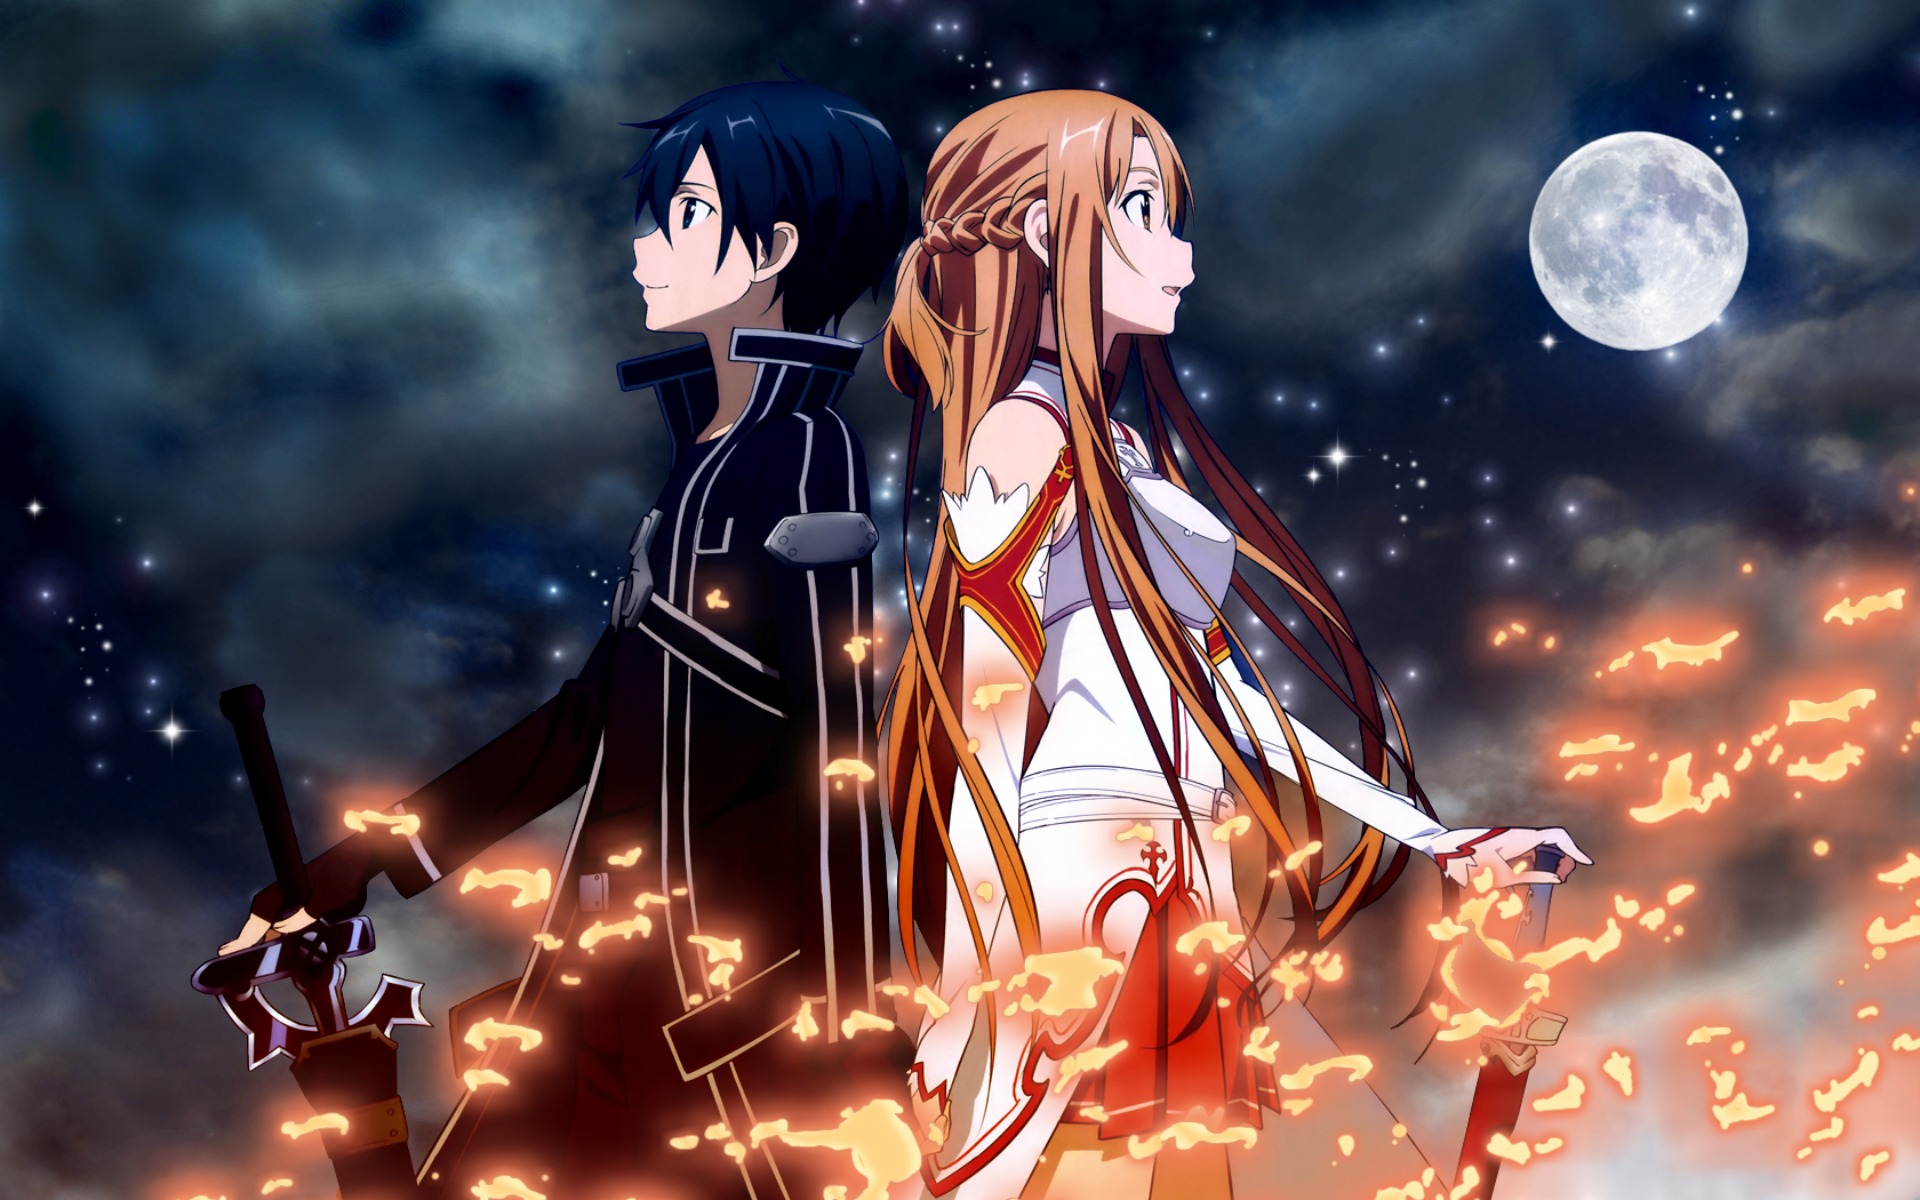 Sword Art Online Image Sao HD Wallpaper And Background Photos